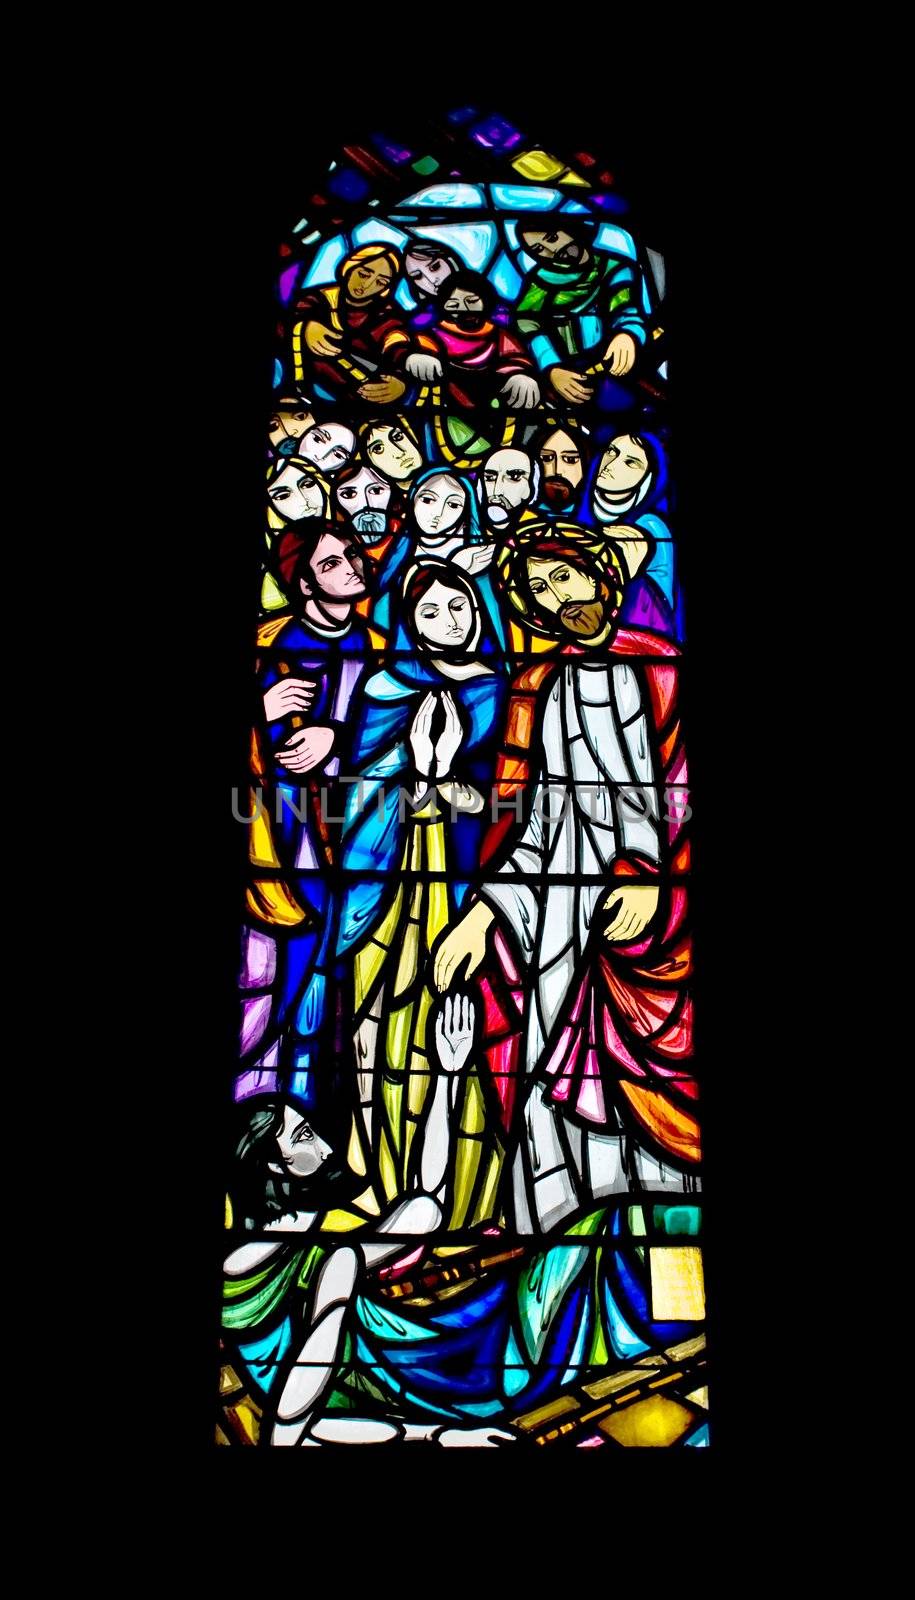 A religious stained glass window inside a church